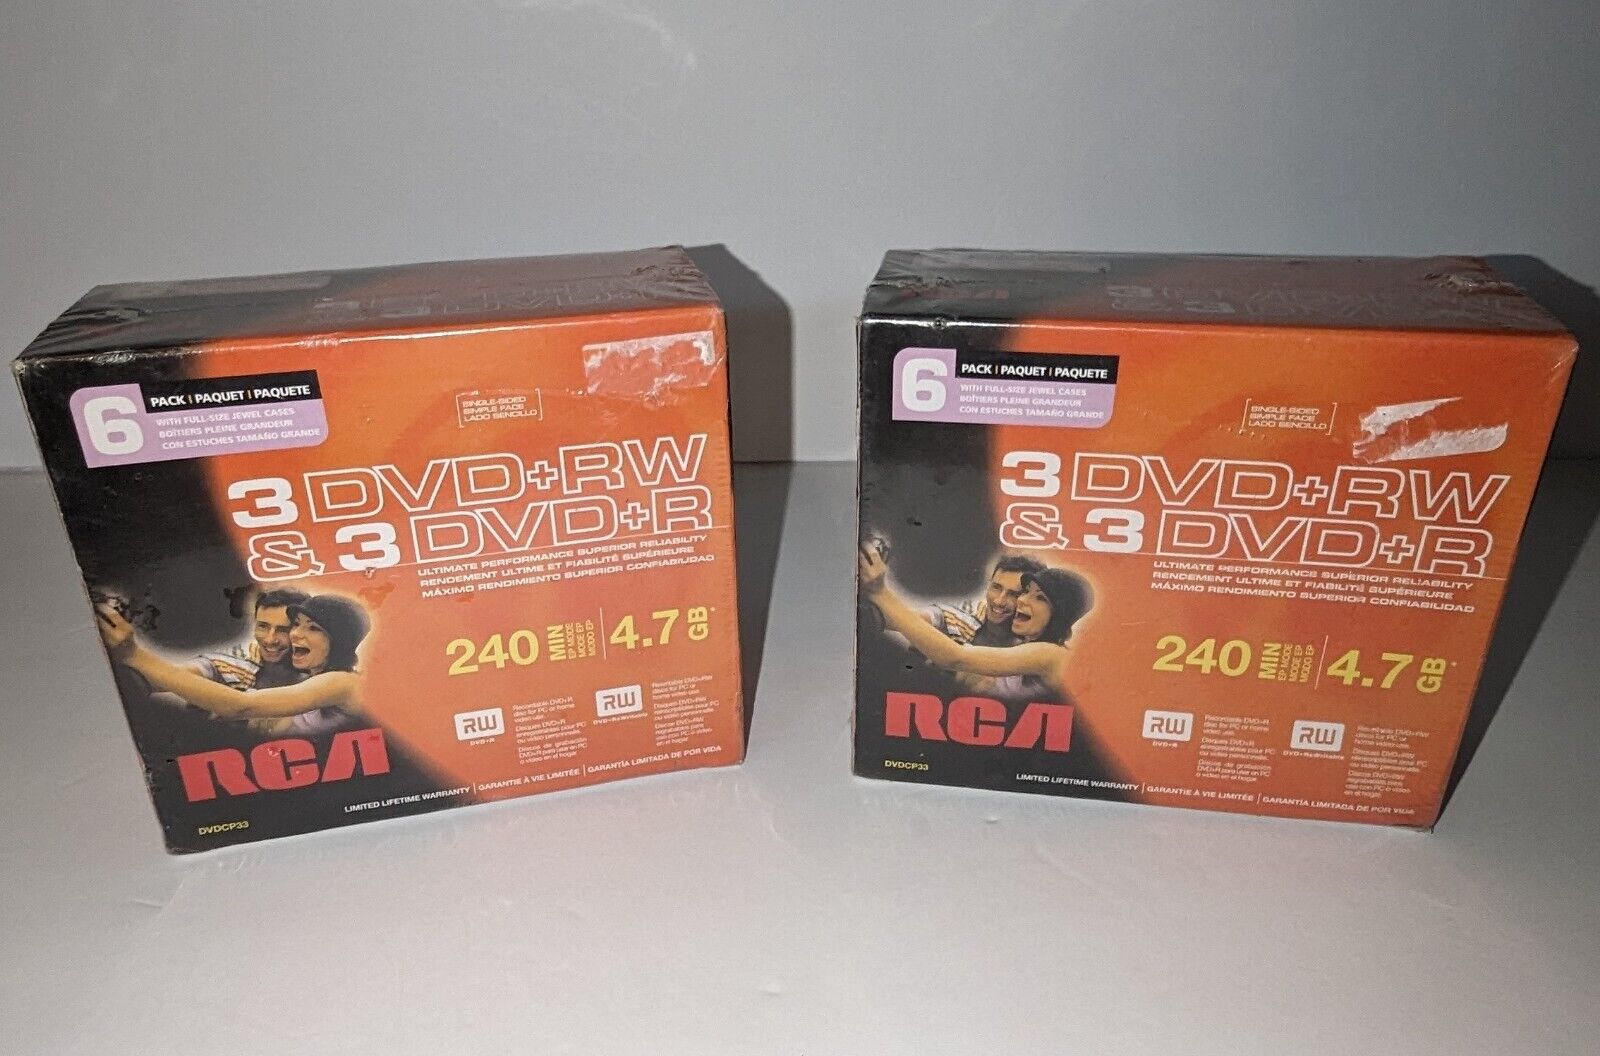 Set Of 2 RCA DVDCP33 DVD+R/RW Combo Pack (6-pk) 240 Min 4.7 GB With Jewel Cases